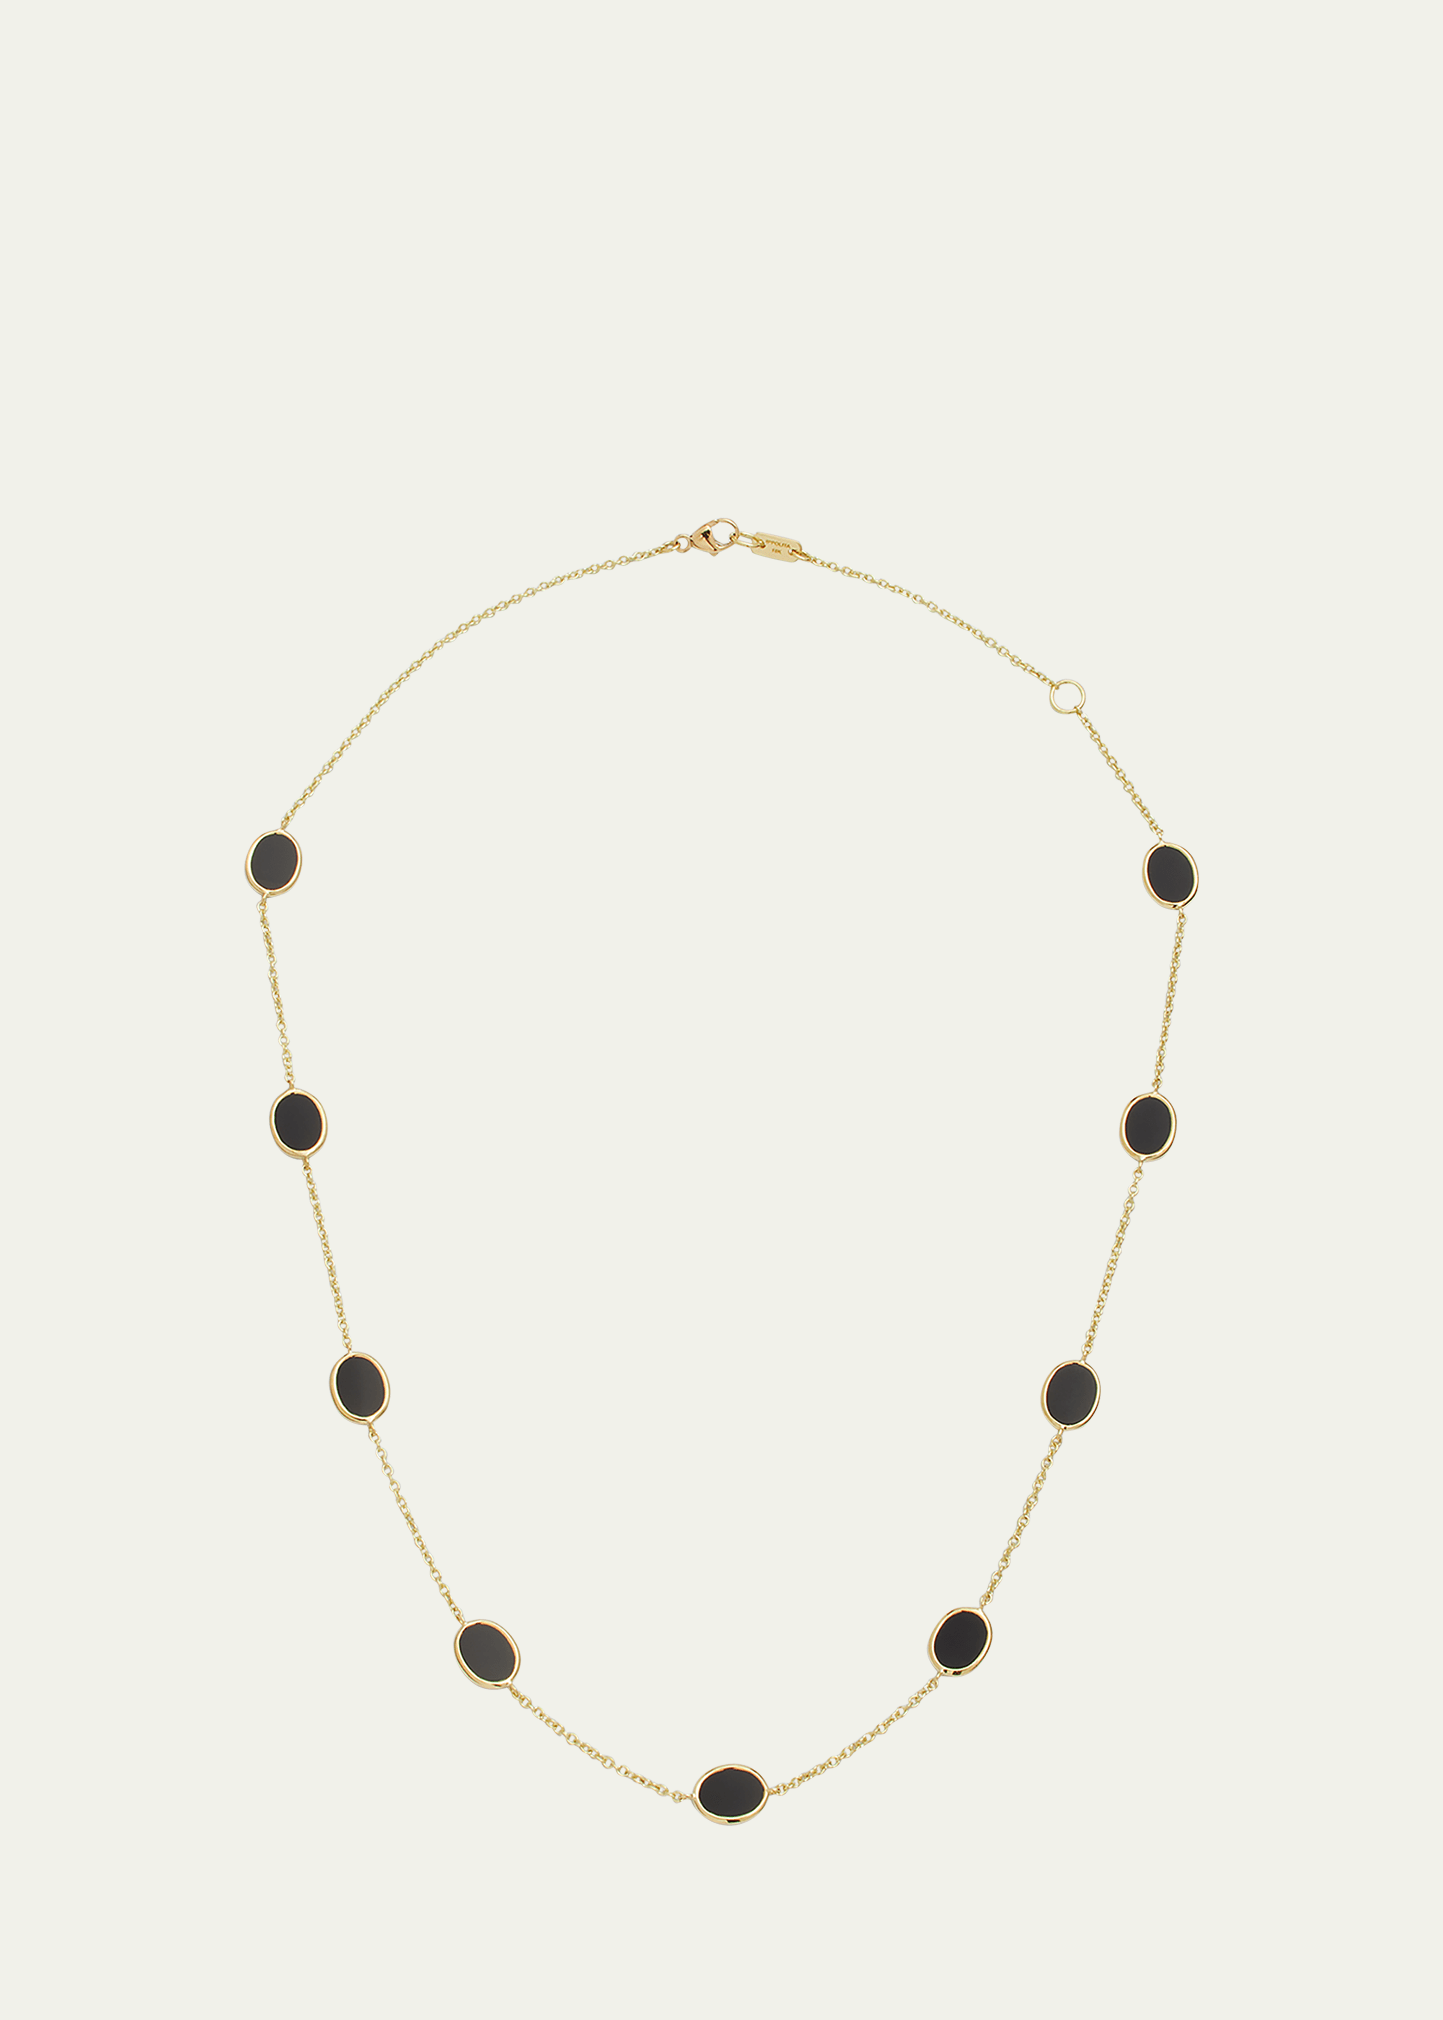 IPPOLITA 18K POLISHED ROCK CANDY CONFETTI NECKLACE IN ONYX